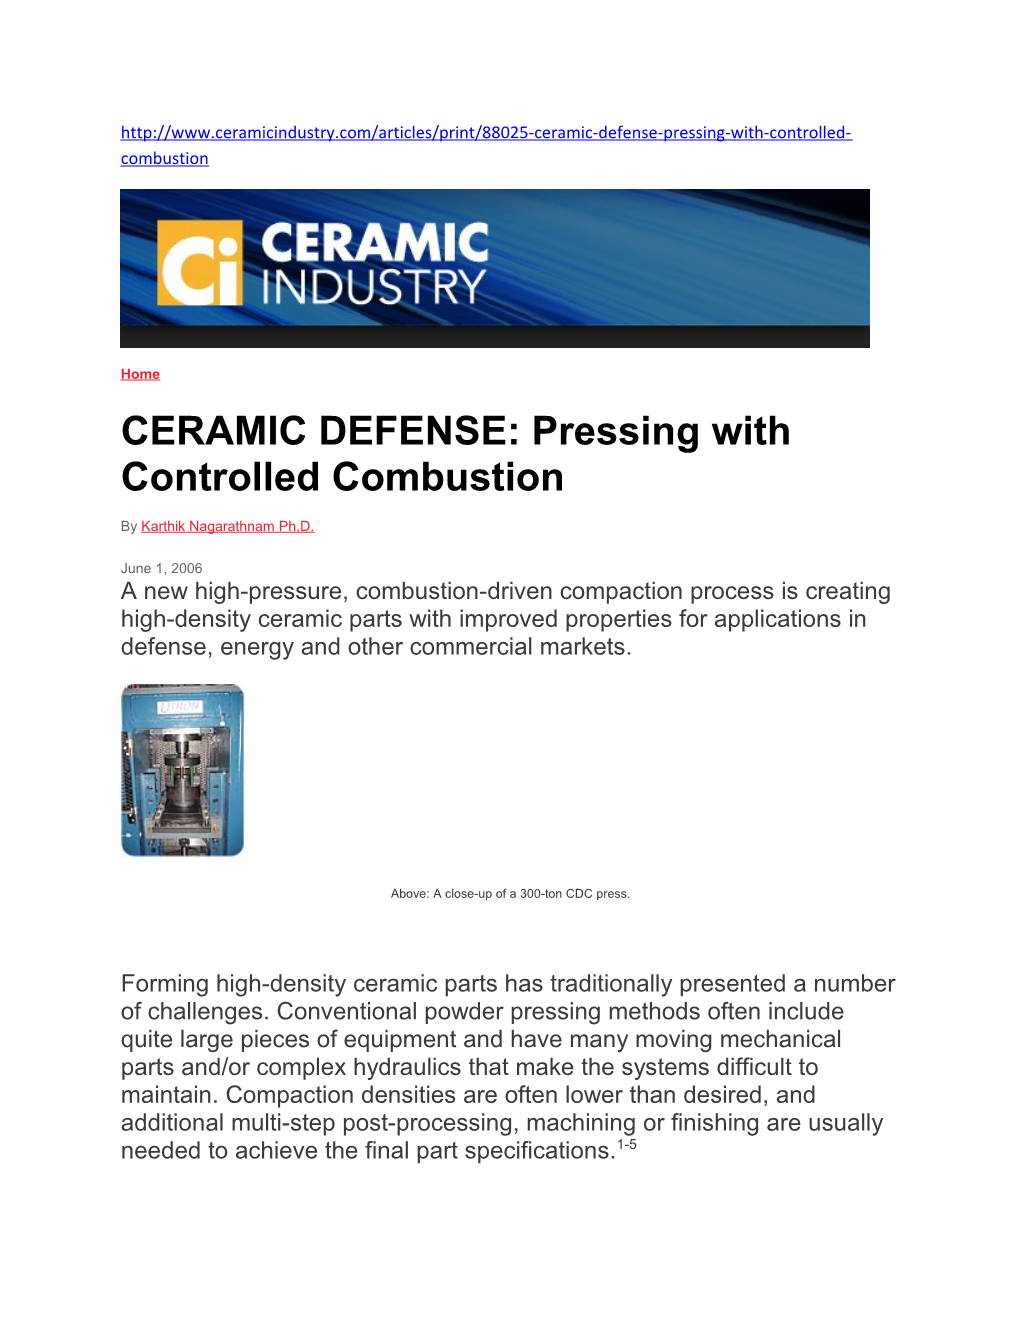 CERAMIC DEFENSE: Pressing with Controlled Combustion